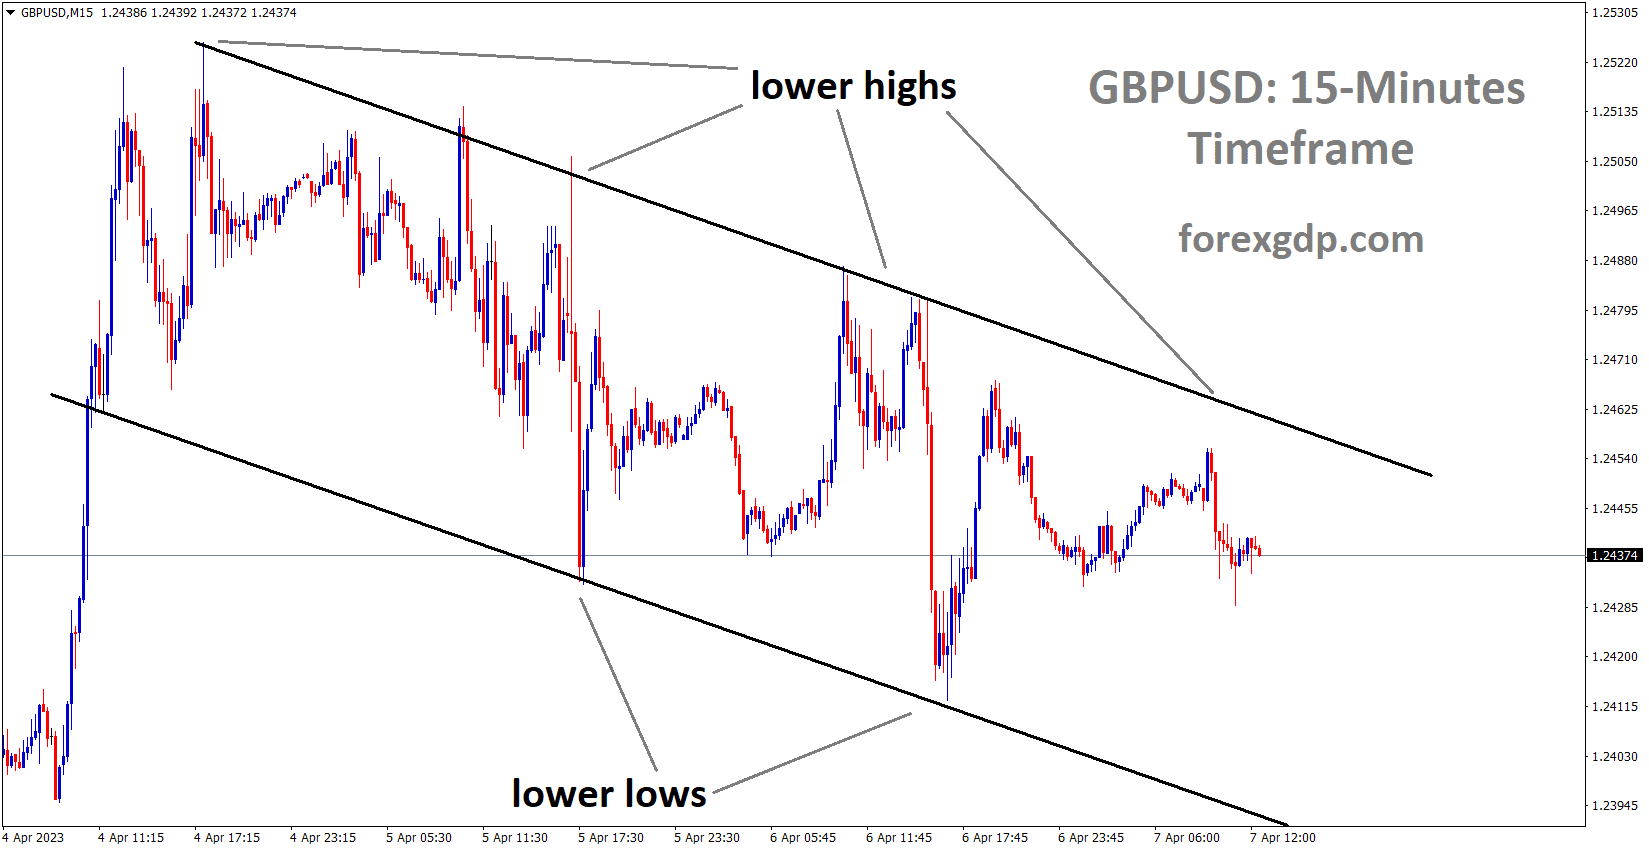 GBPUSD is moving in the Descending channel and the market has fallen from the lower high area of the channel 1